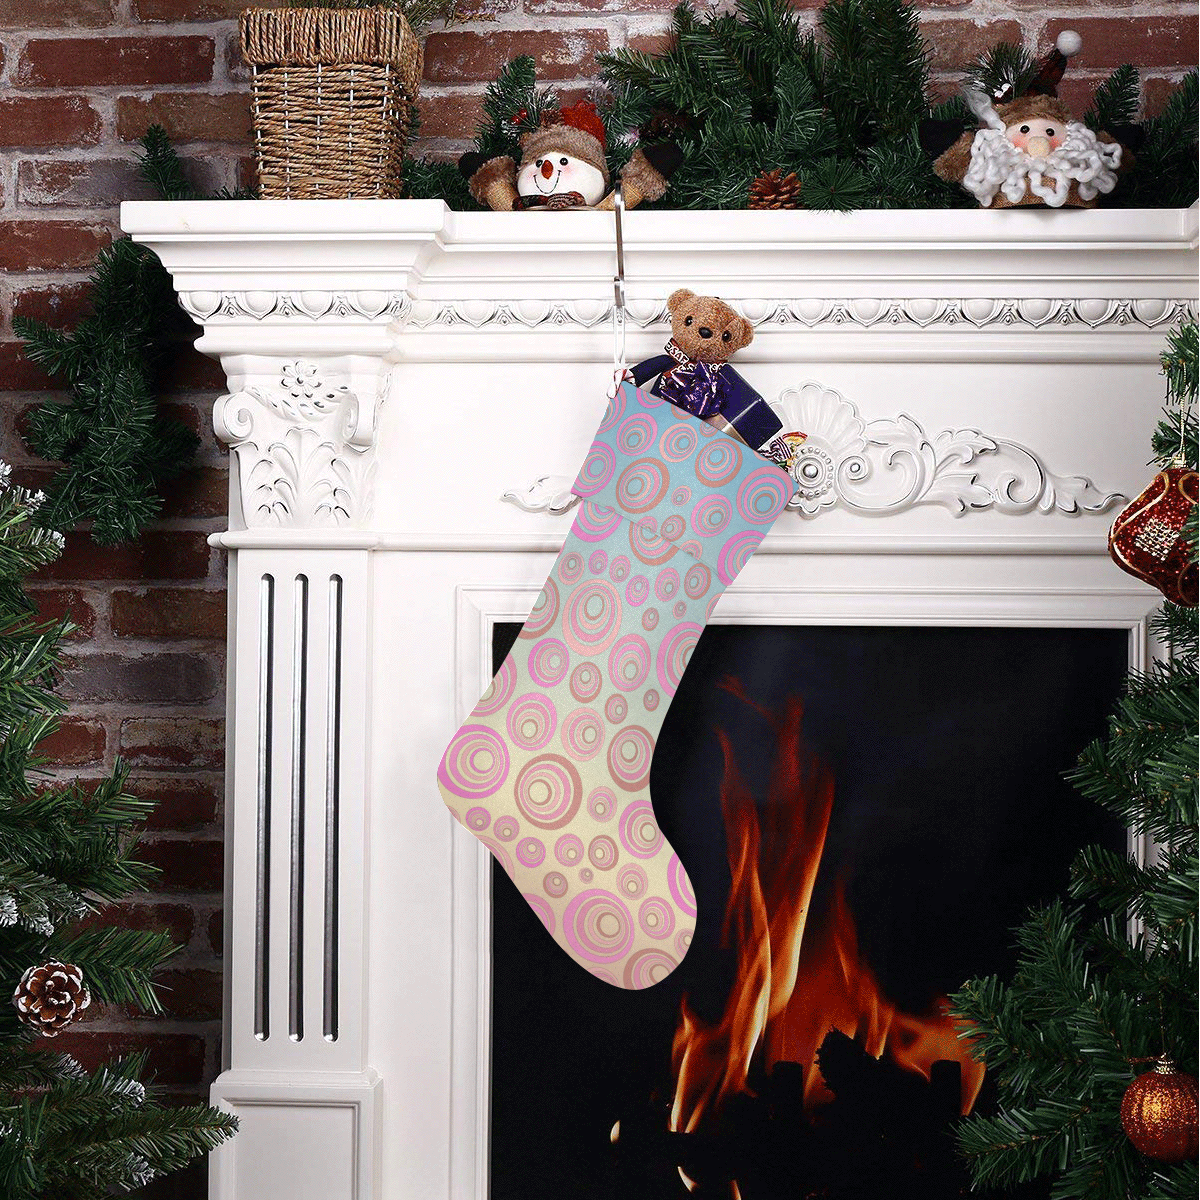 Retro Psychedelic Pink and Blue Christmas Stocking